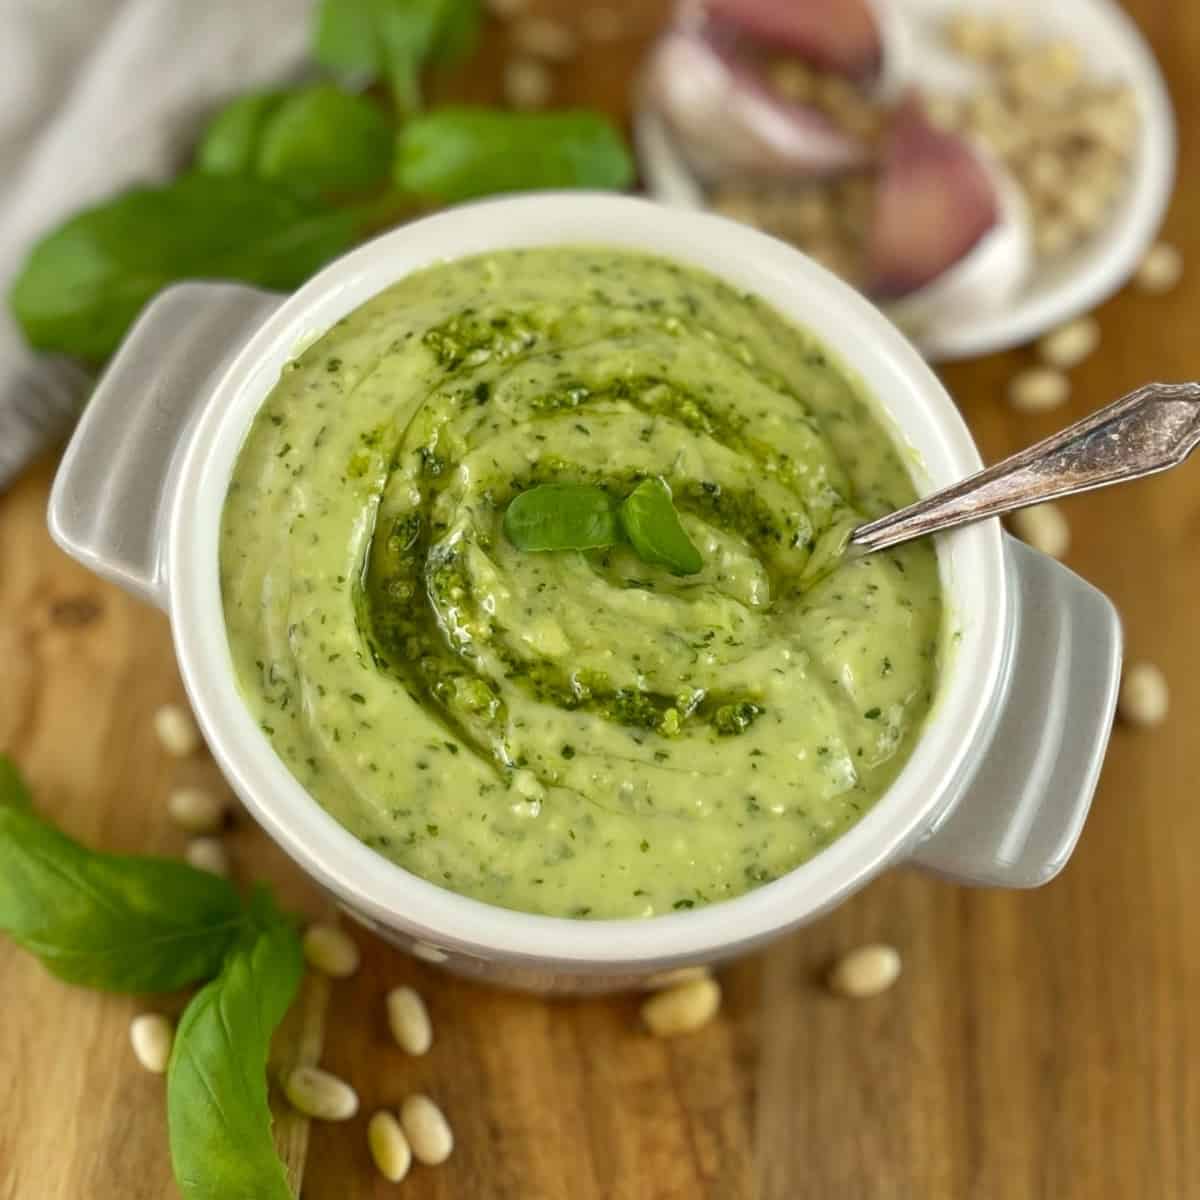 Mixture of mayonnaise and basil pesto in a white bowl on a wooden chopping board with a spoon.